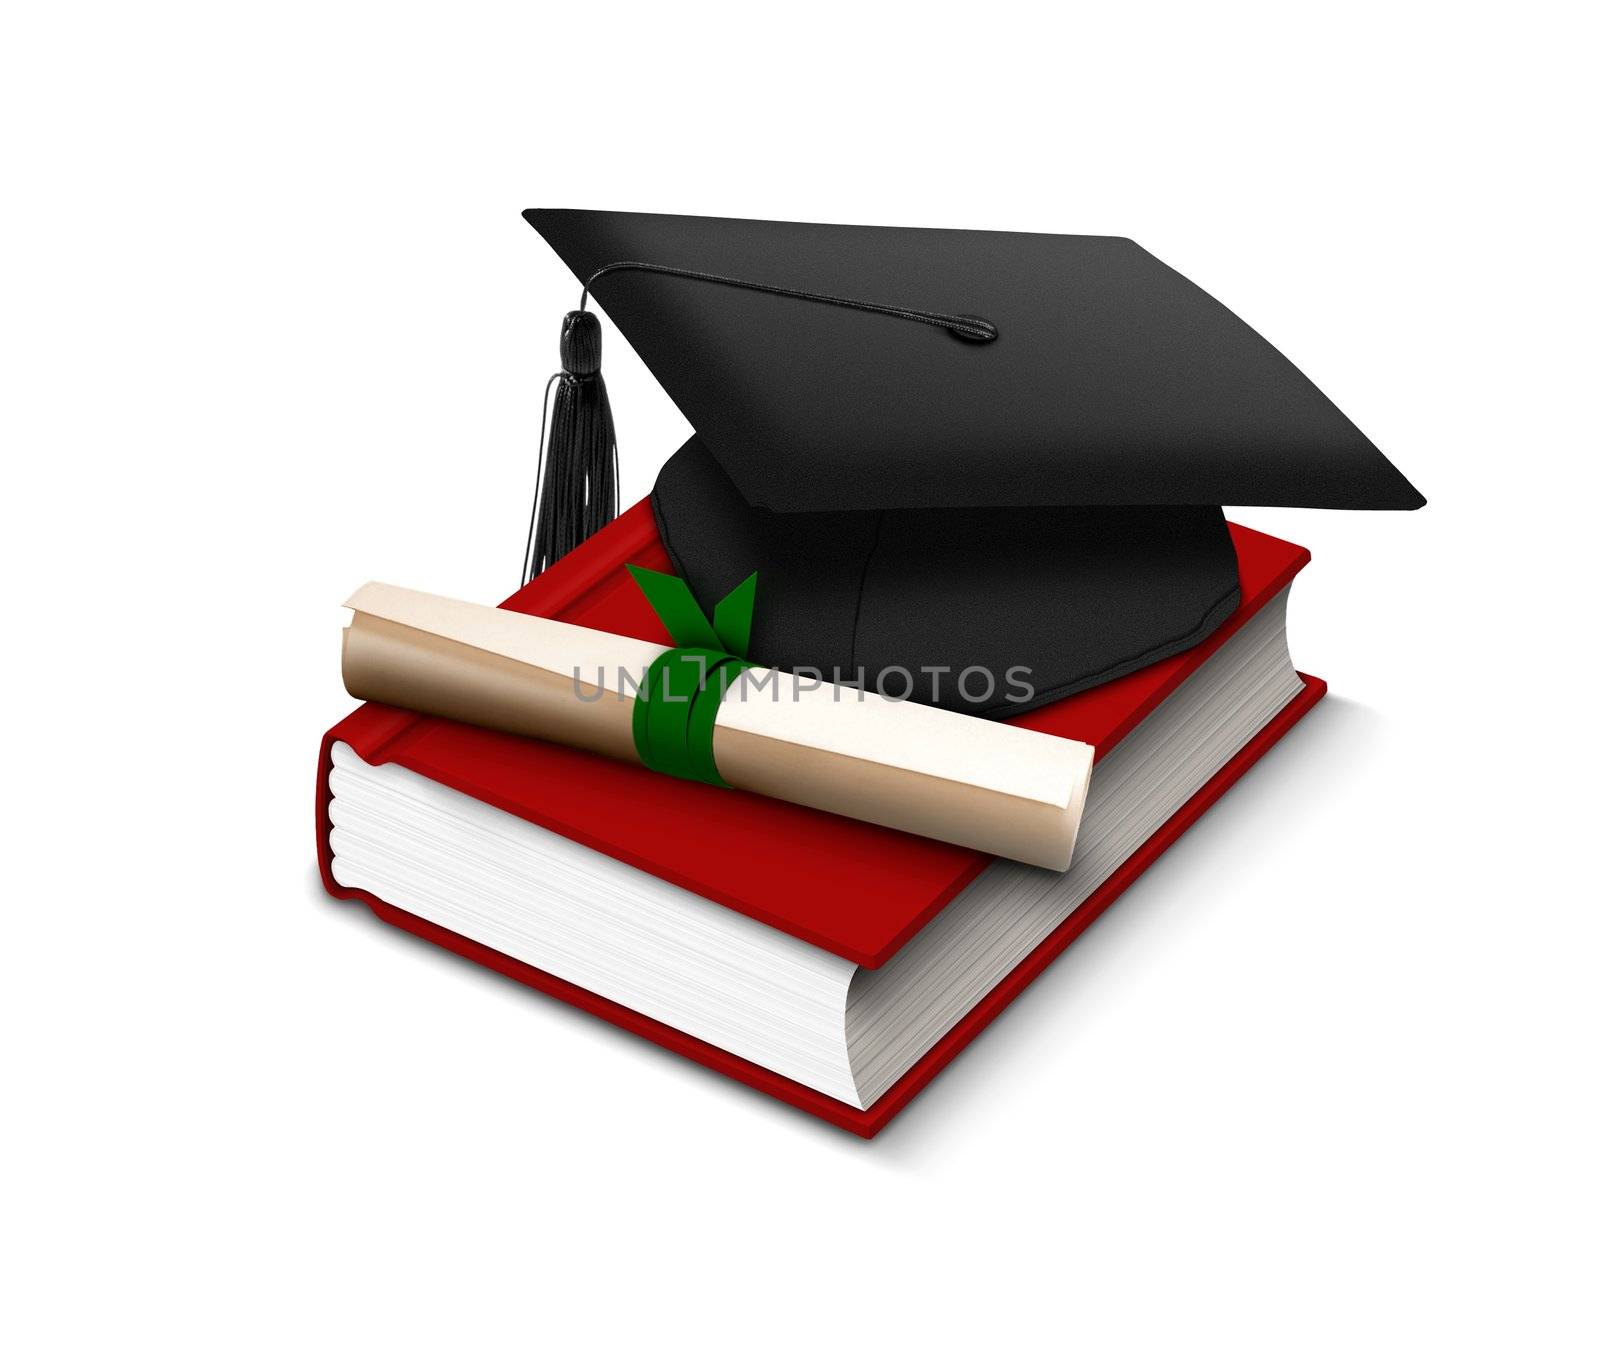 Graduation hat, scroll and red book